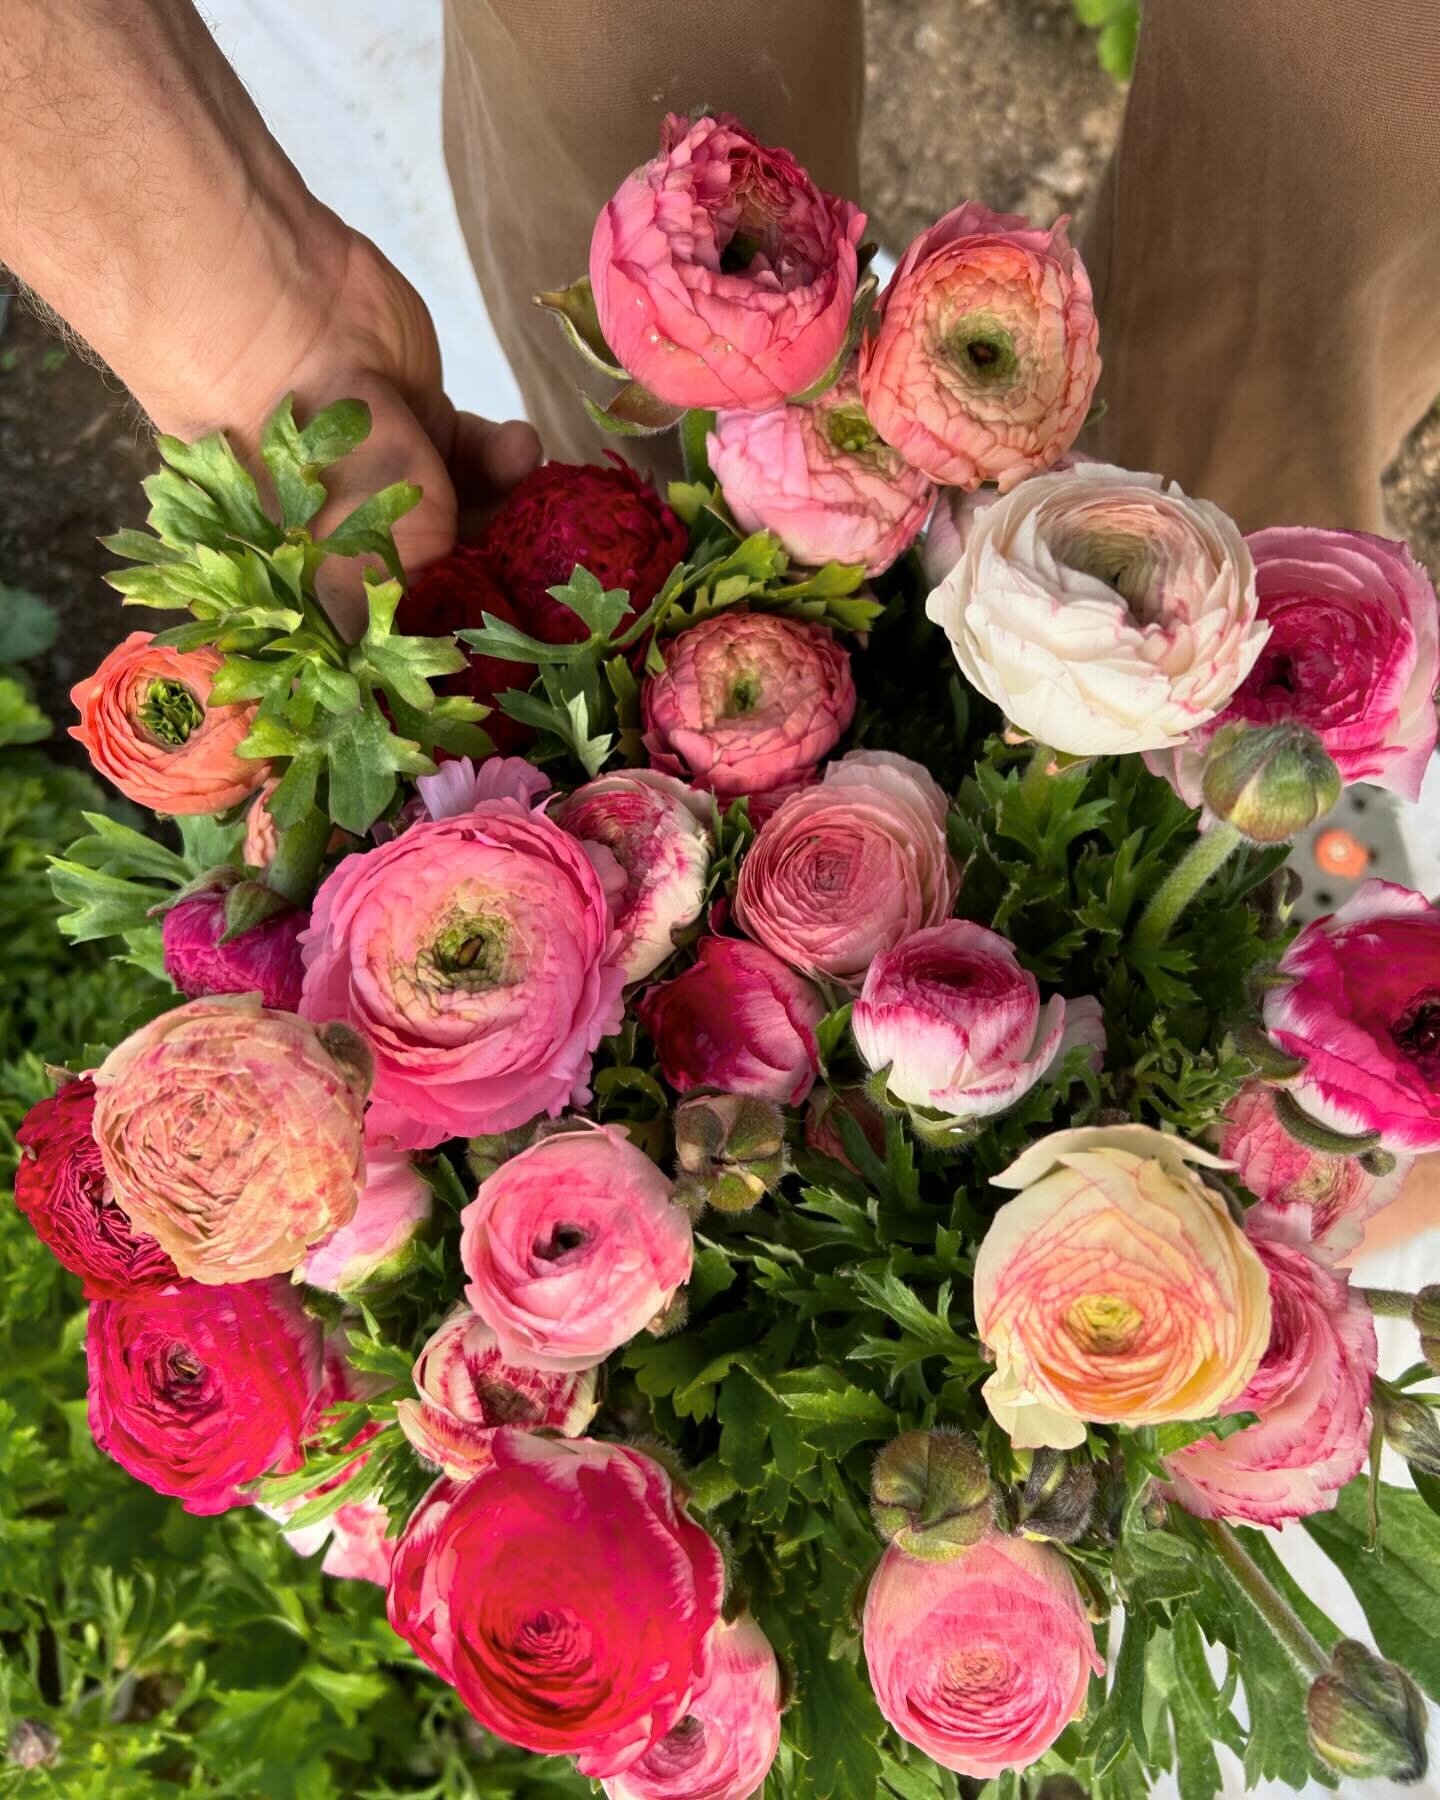 March 4th and spread joy. 
Ranunculus are showing their beautiful faces already! Stay tuned for updates as we navigate our early spring season. We aim to be at markets as much as possible but wholesale orders take up much of our inventory right now. 